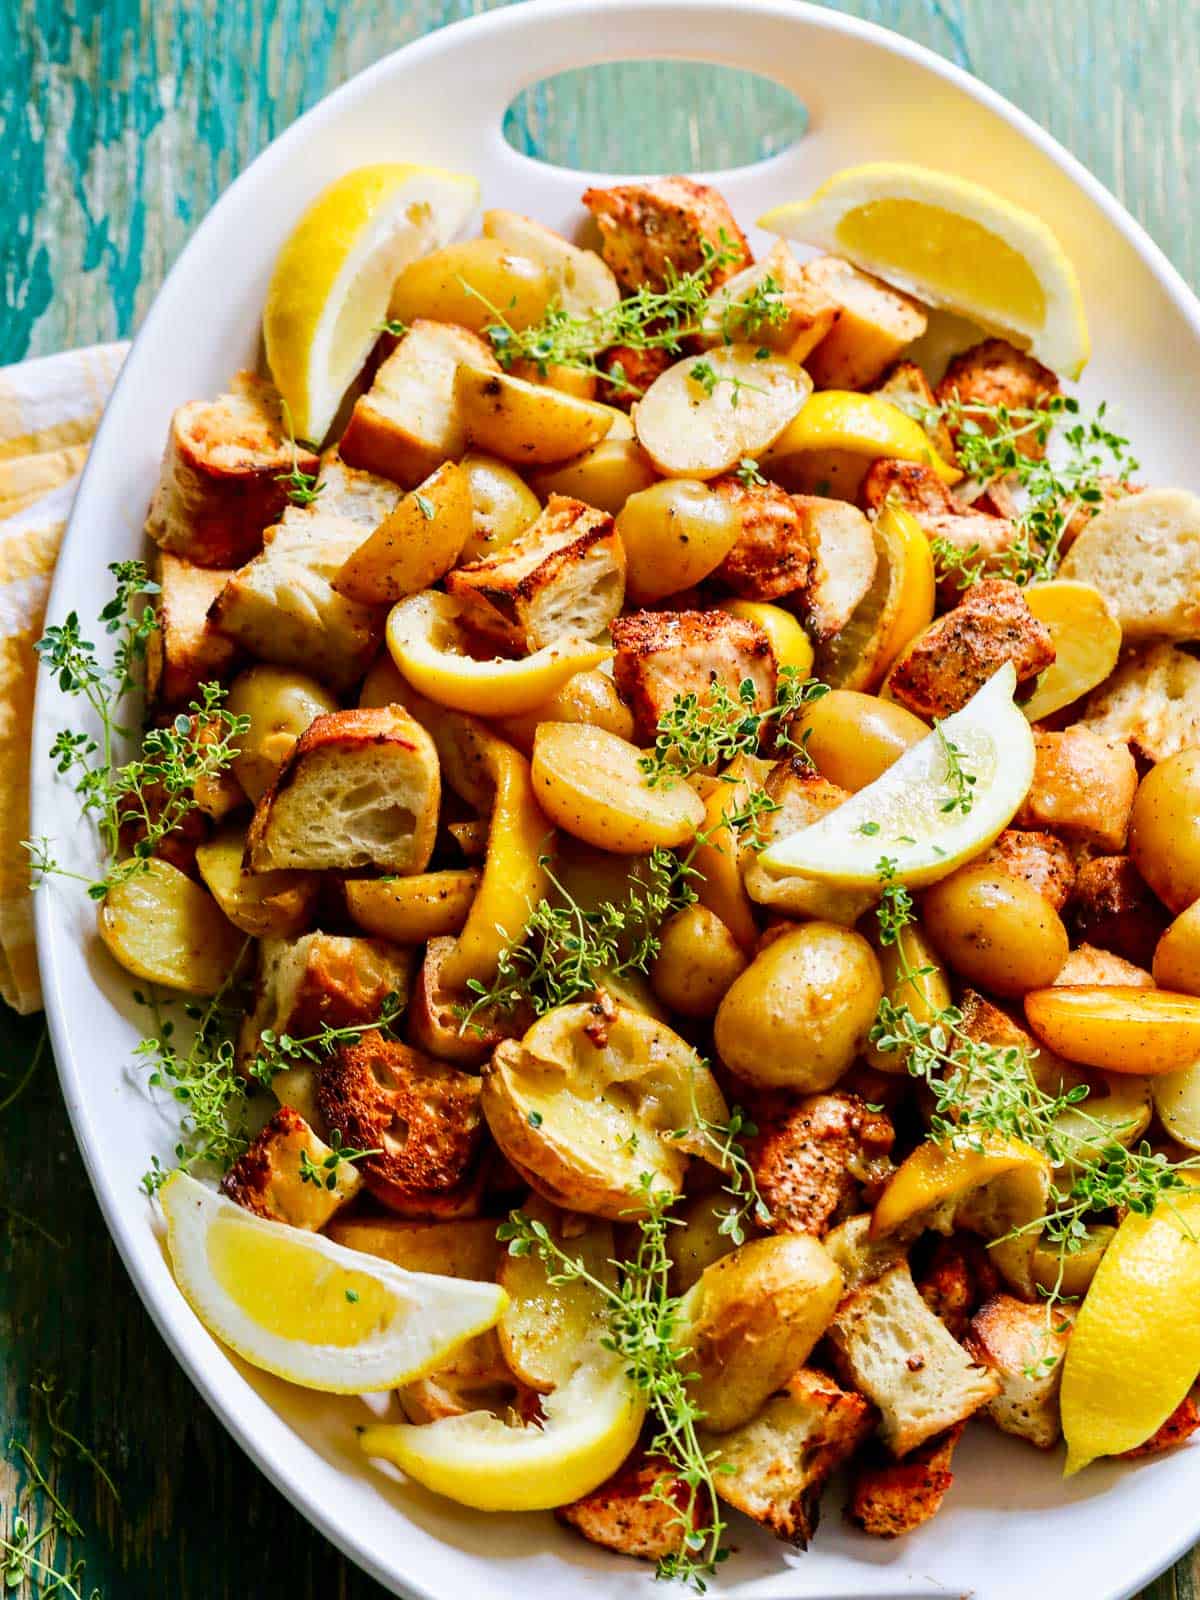 A large white oval platter filled with cooked sheet pan dinner including chicken, potatoes, lemons, and croutons.